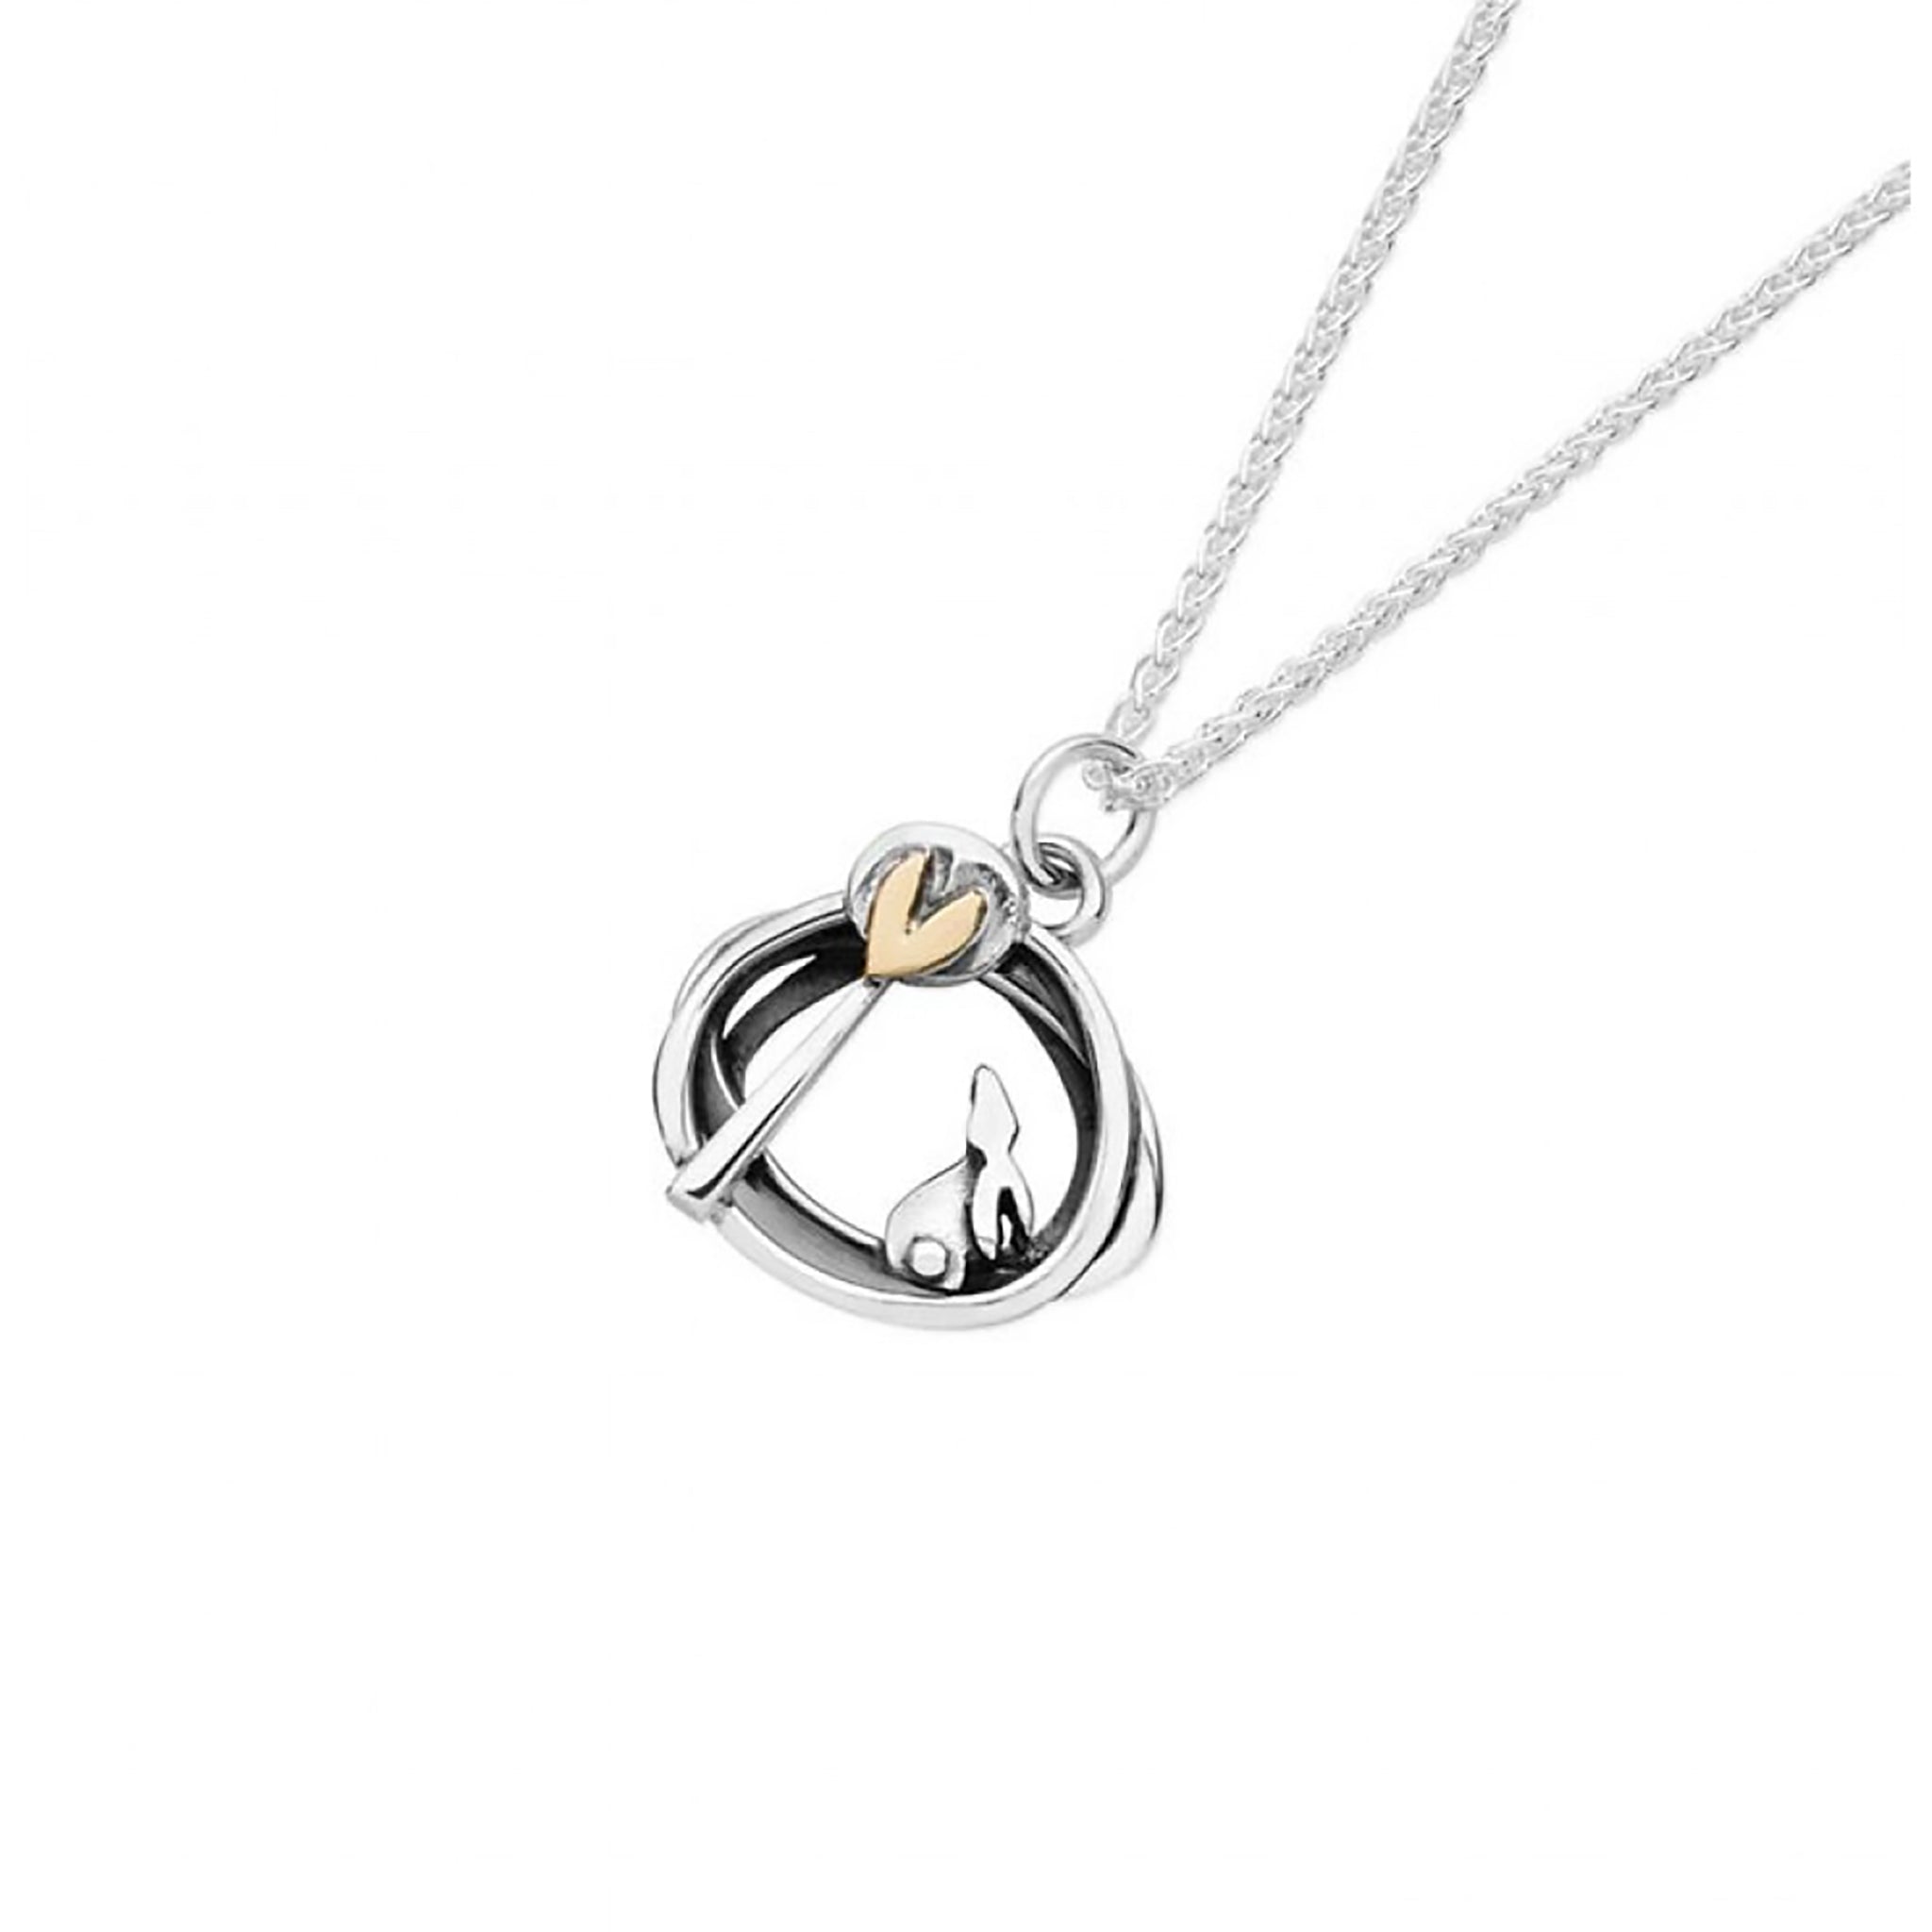 Silver pendant with irregular round shape, a bunny and tree design and a gold heart detail on silver chain